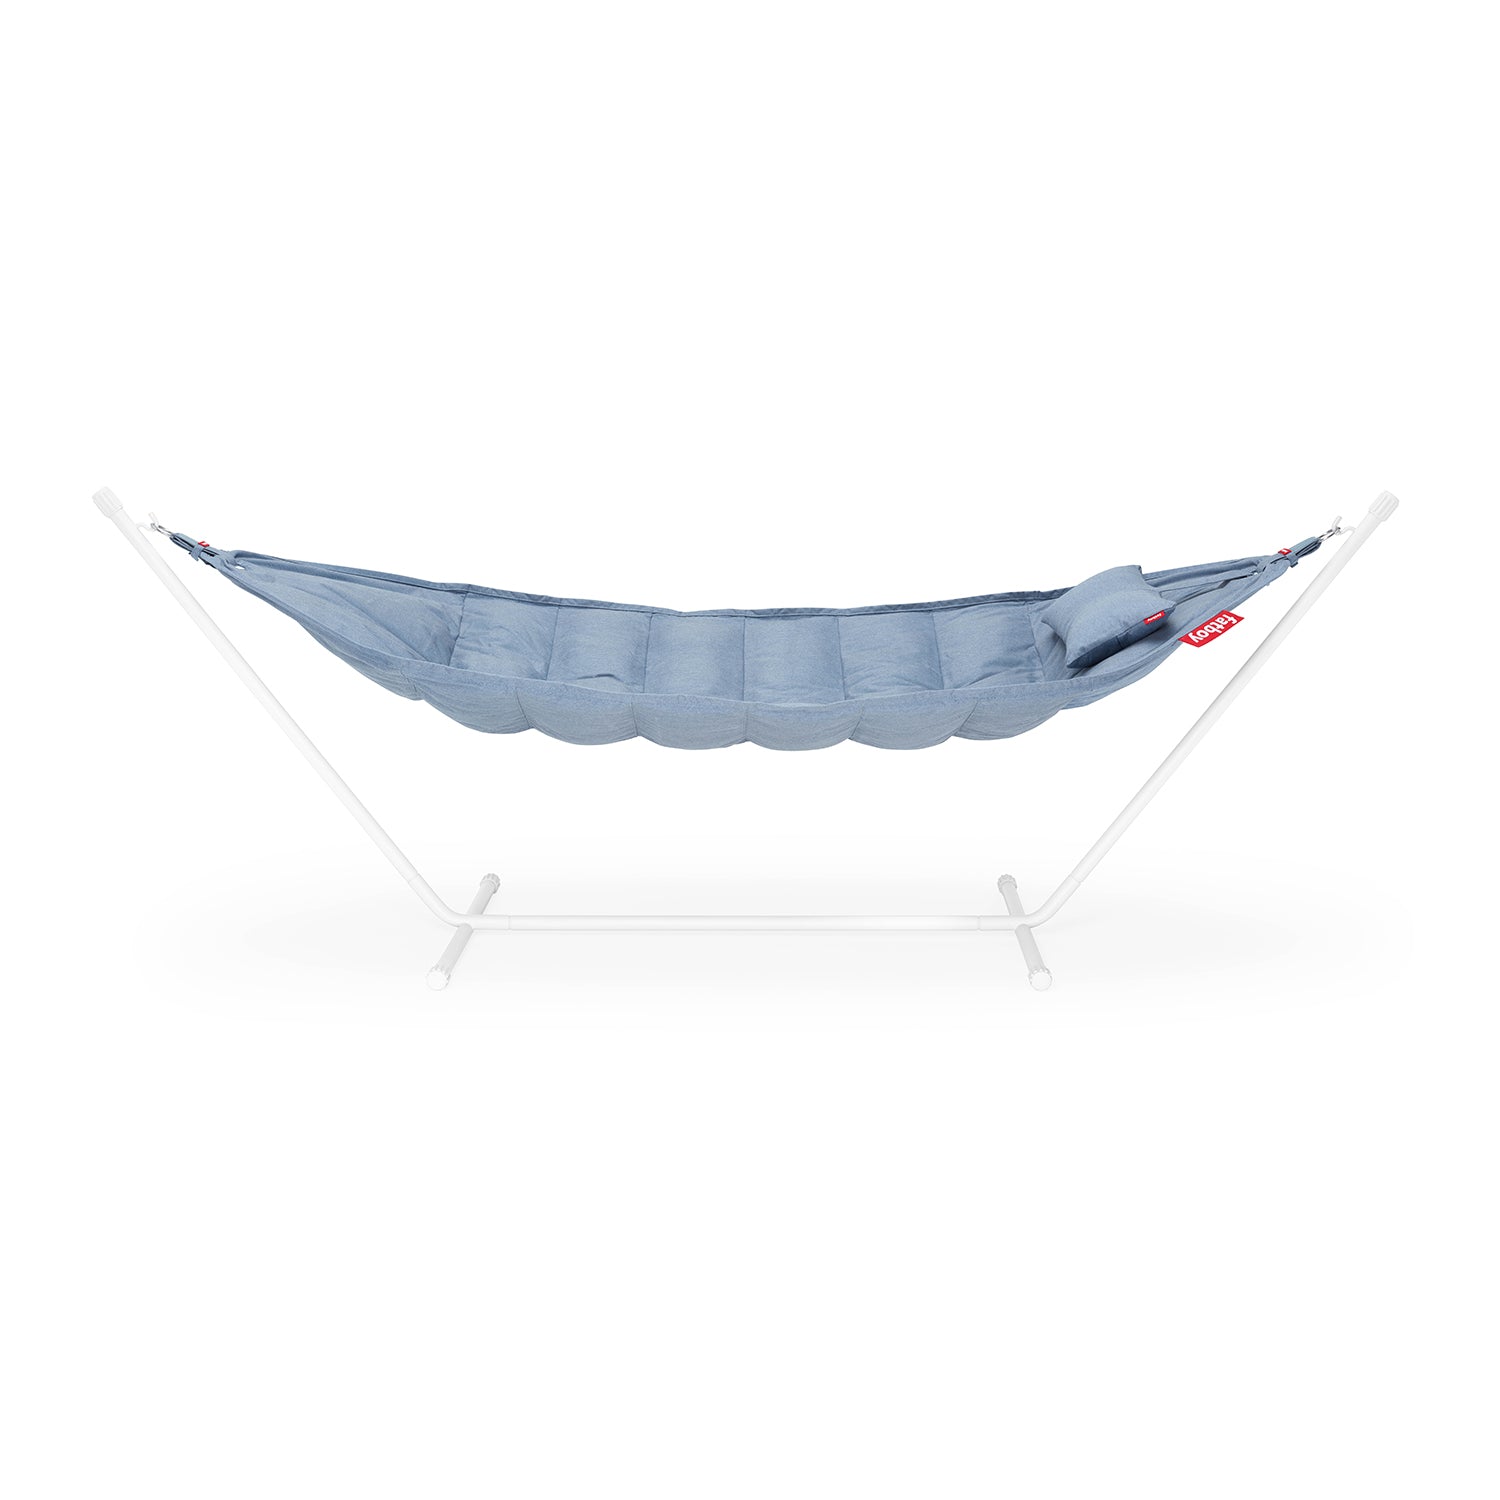 Headdemock Superb Deluxe Hammock with Pillow - The Design Choice